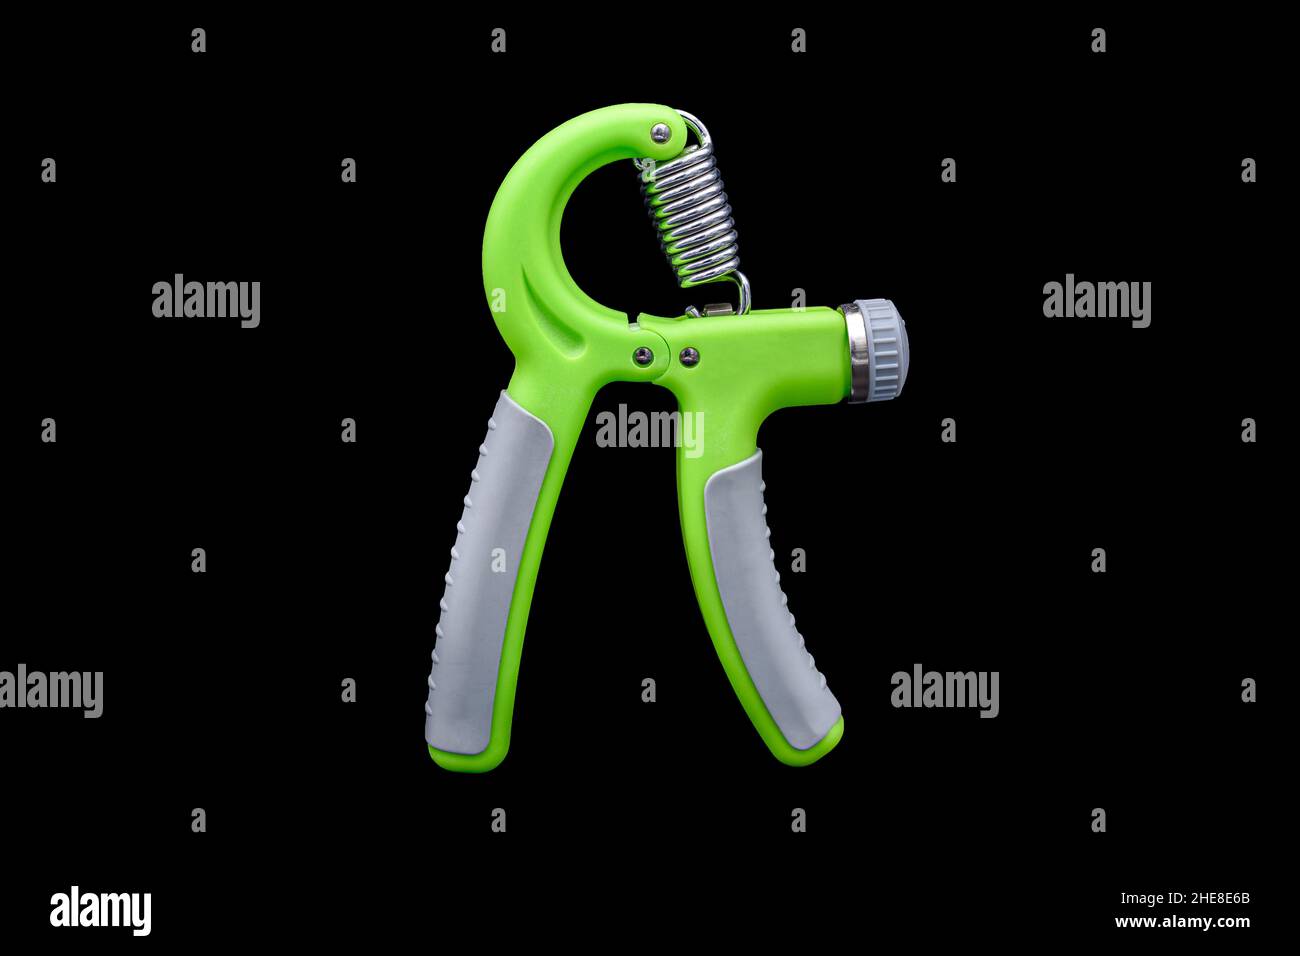 Green Hand Grip Strengthening Tool isolated on black background. Stock Photo